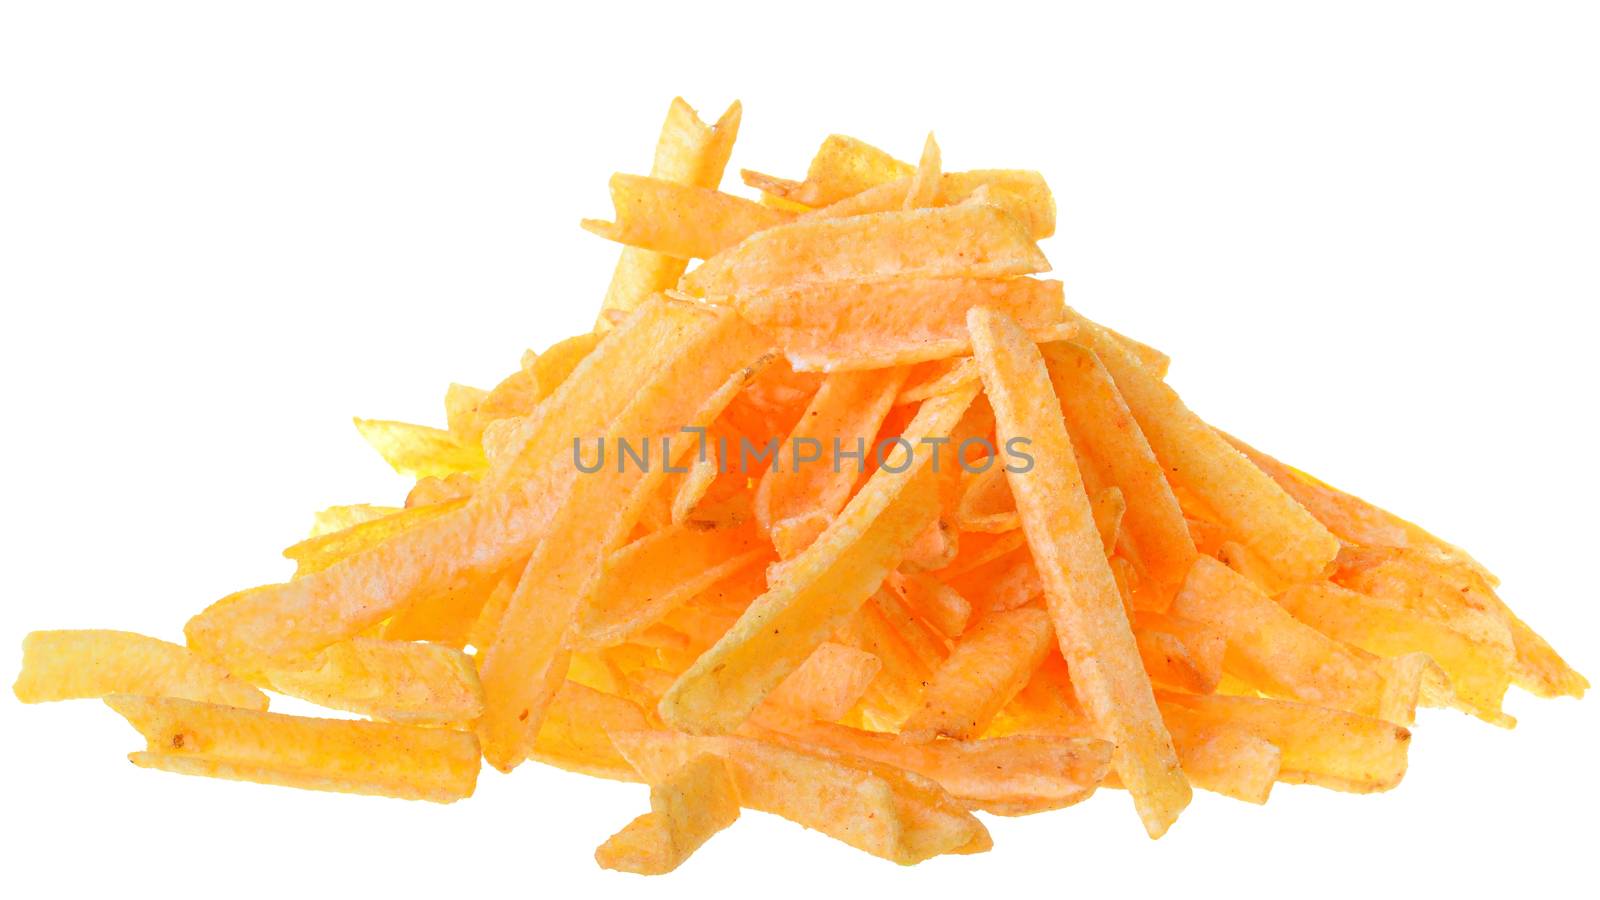 Potato chips with spices on white background.